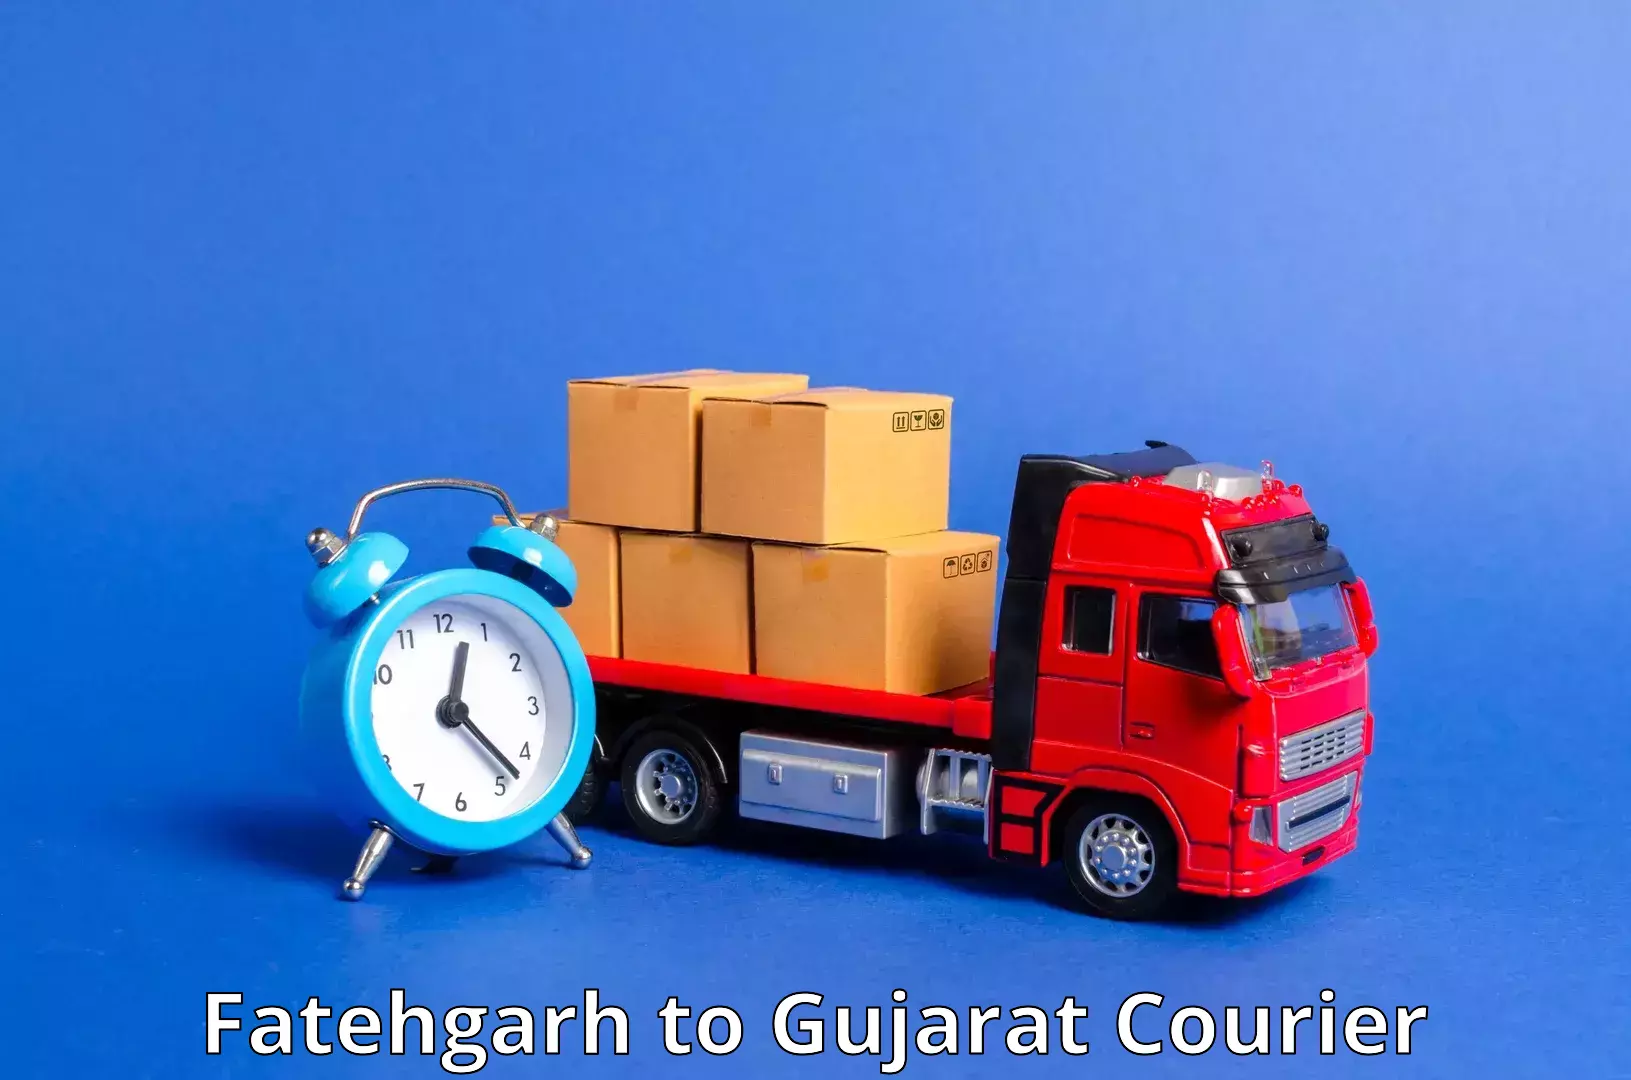 Package delivery network Fatehgarh to Junagadh